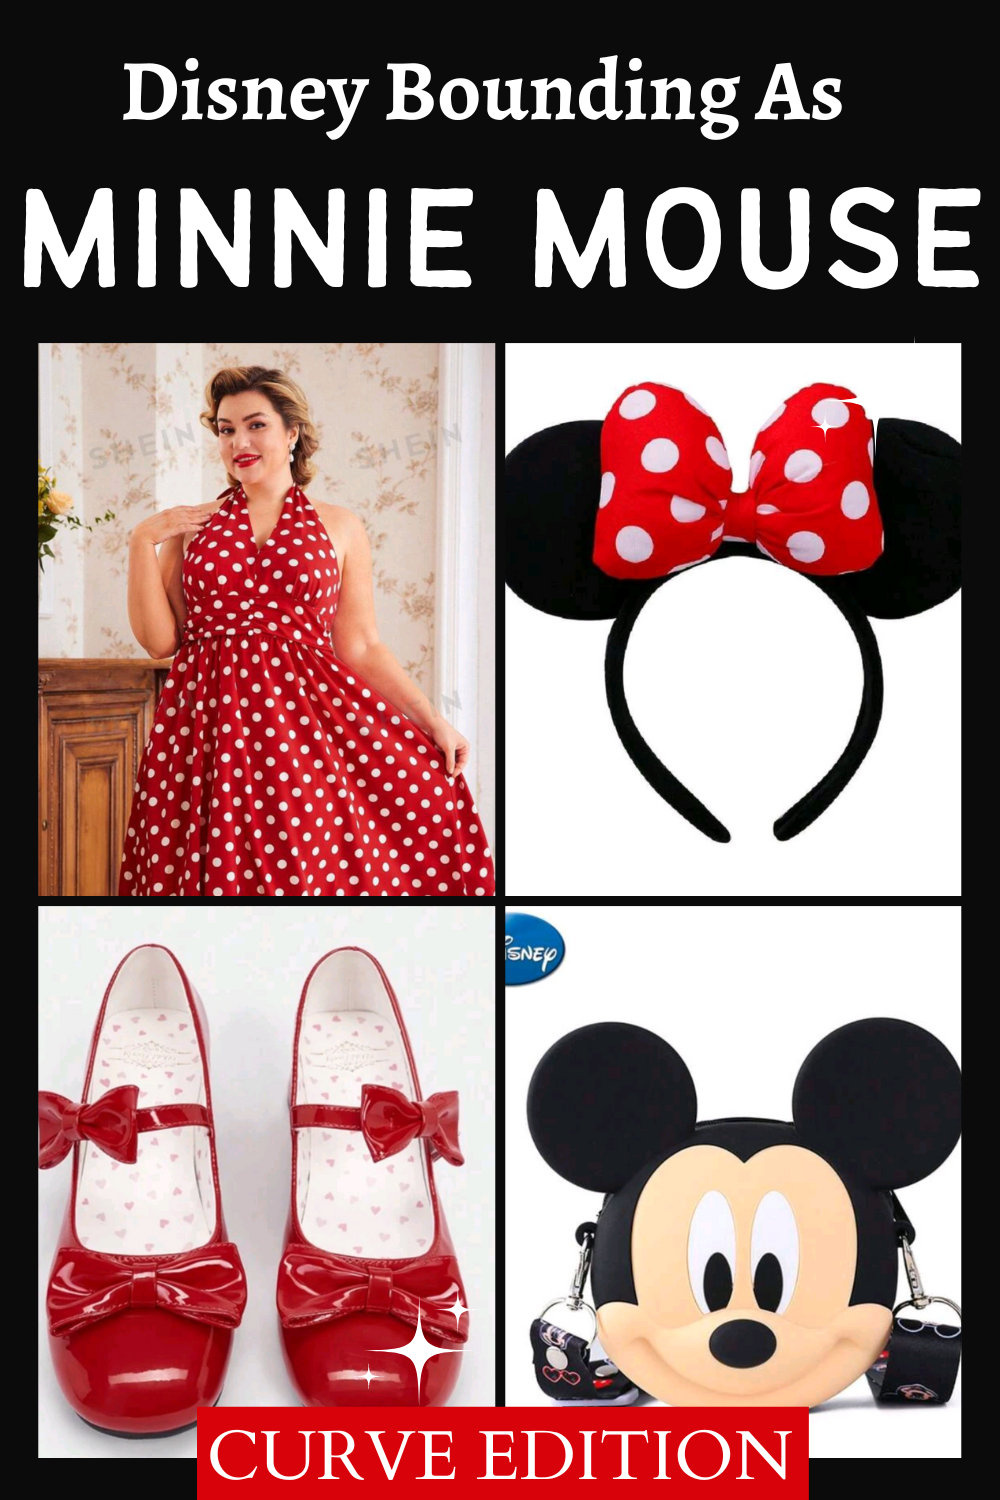 Minnie Mouse Disney Bounding cosplay